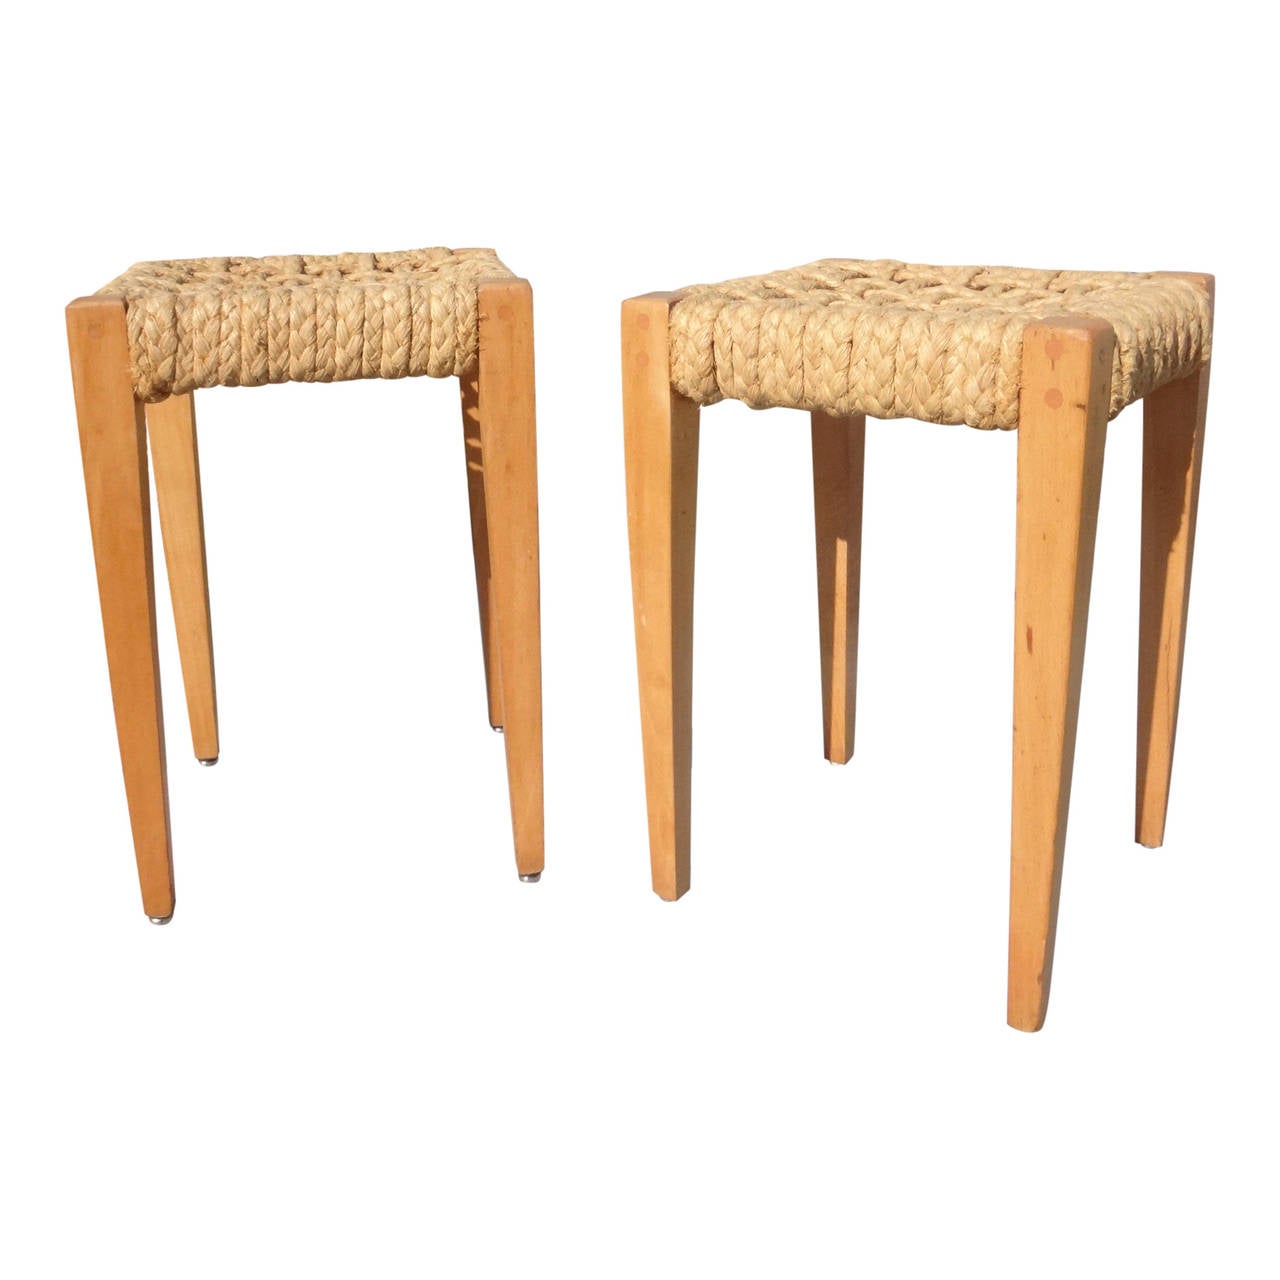 Pair of wood and rope raphia web stools by Adrien Audoux and Frida Minnet.